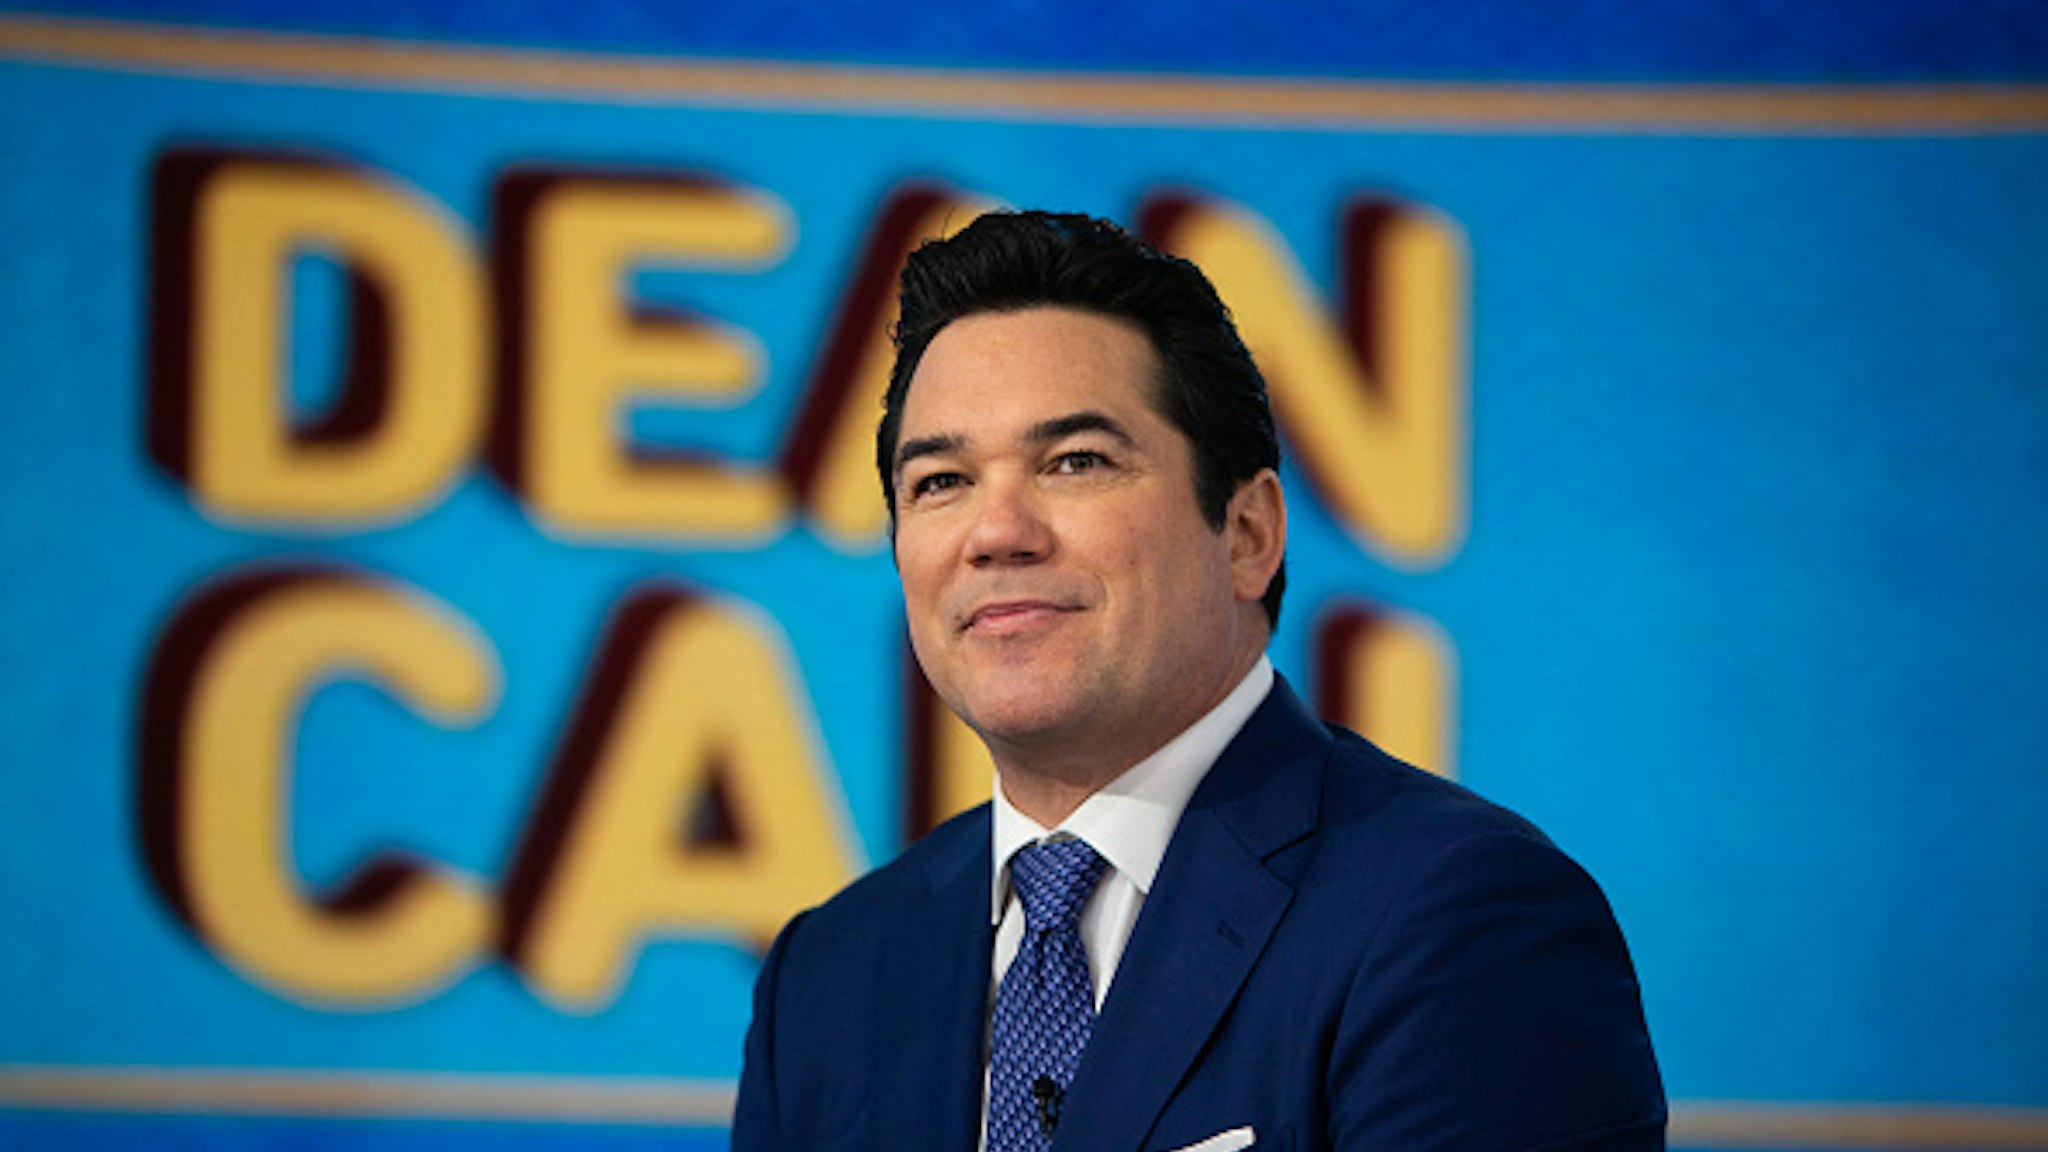 TODAY -- Pictured: Dean Cain on Thursday, January 24, 2019 --